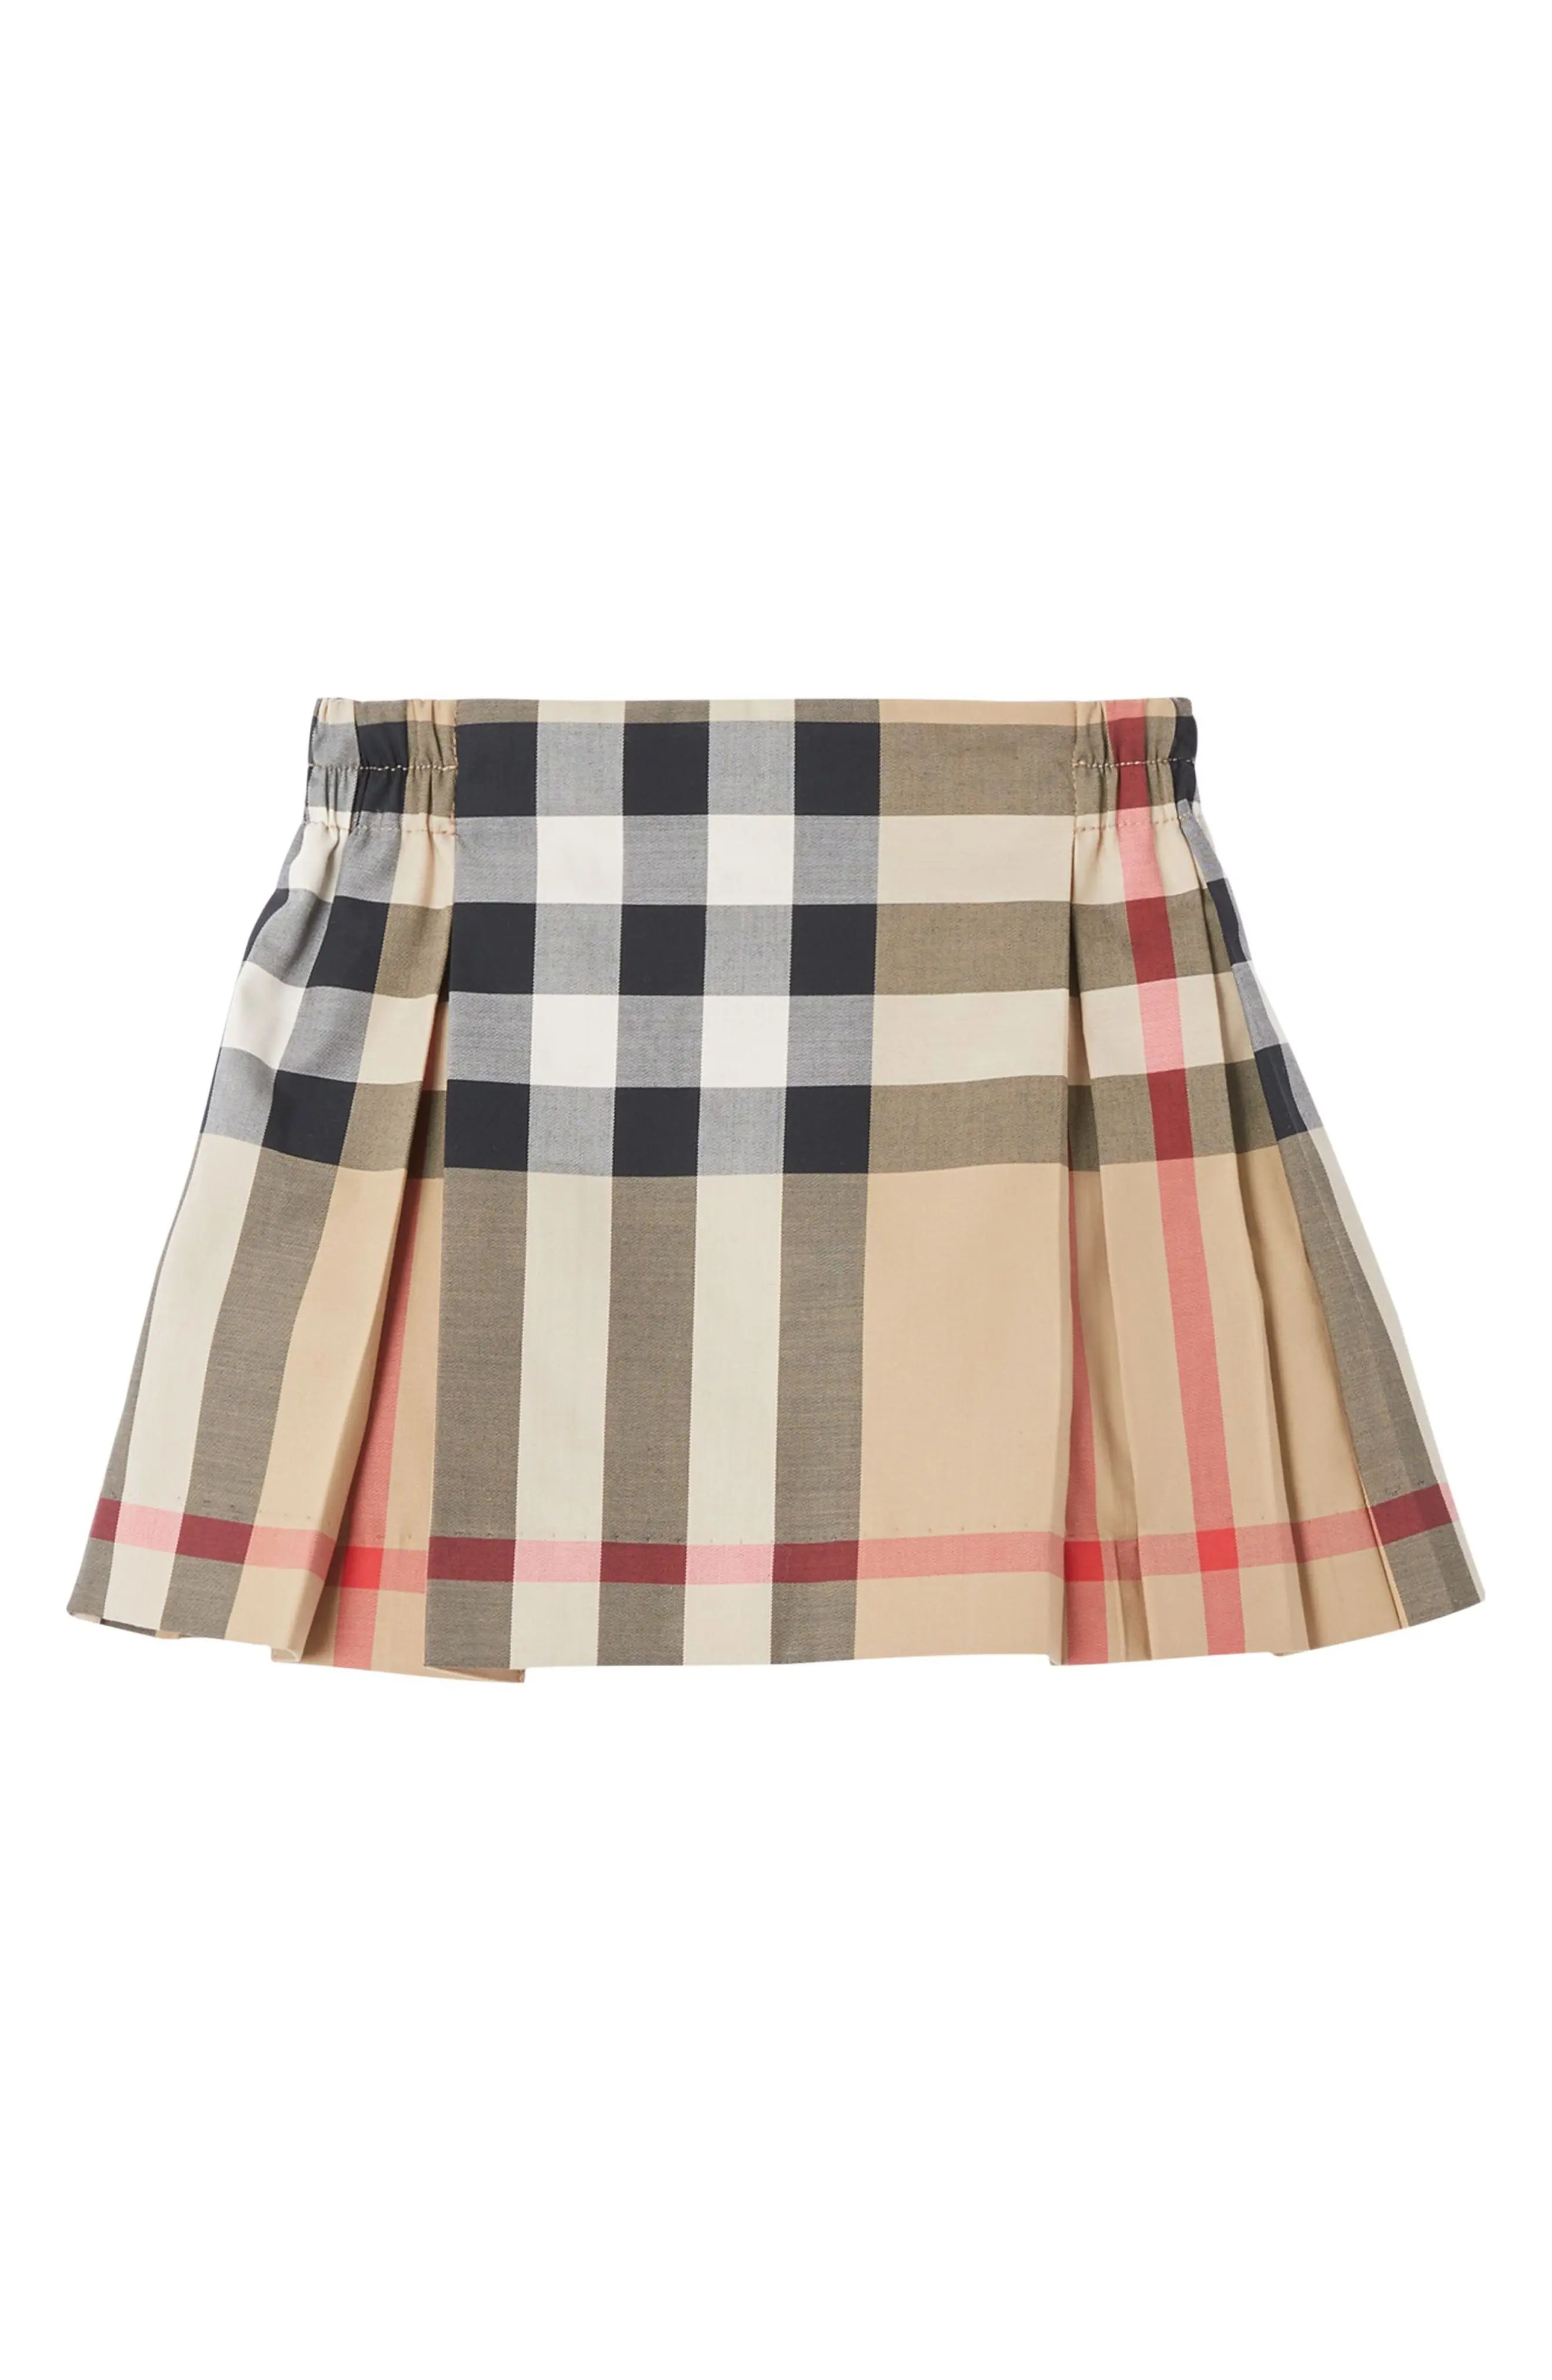 Burberry Kids' Mini Hilde Iconic Check Pleated Skirt, Size 12M in Archive Beige Ip Chk at Nordstrom | Nordstrom